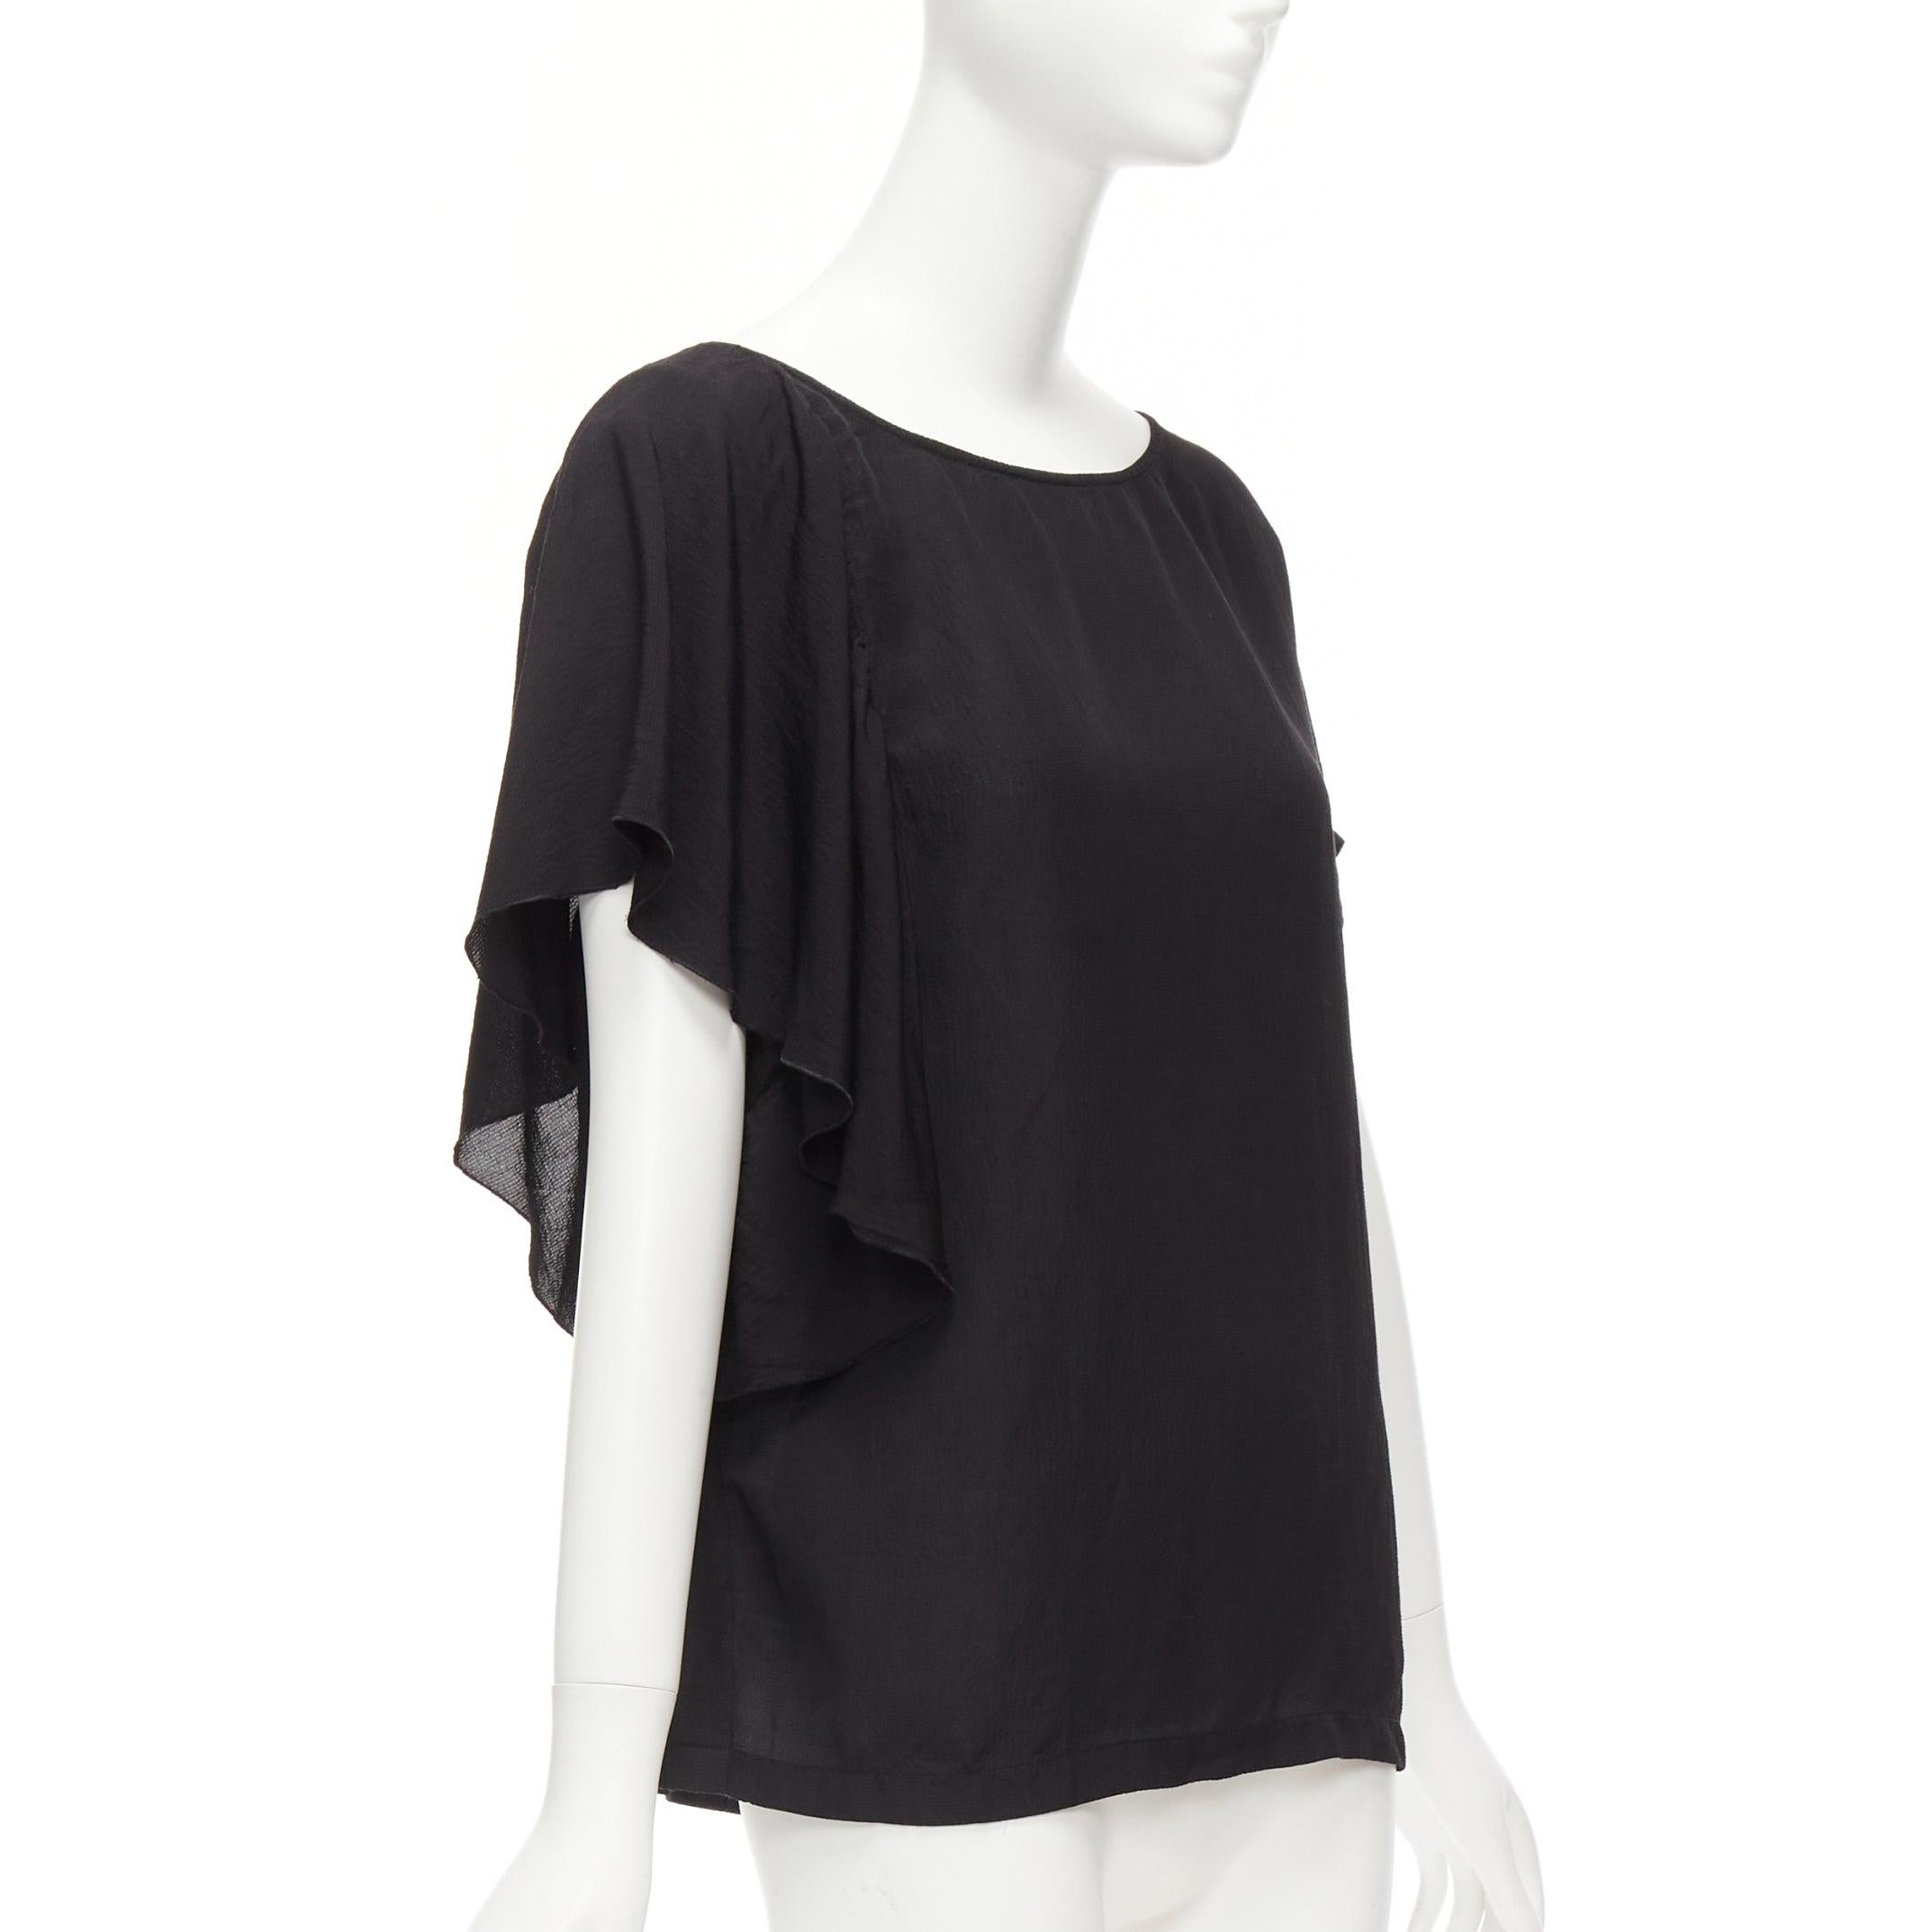 DRIES VAN NOTEN black viscose linen asymmetric flutter sleeve blouse top FR40 L
Reference: DYTG/A00048
Brand: Dries Van Noten
Material: Viscose, Linen
Color: Black
Pattern: Solid
Closure: Slip On
Made in: Belgium

CONDITION:
Condition: Excellent,